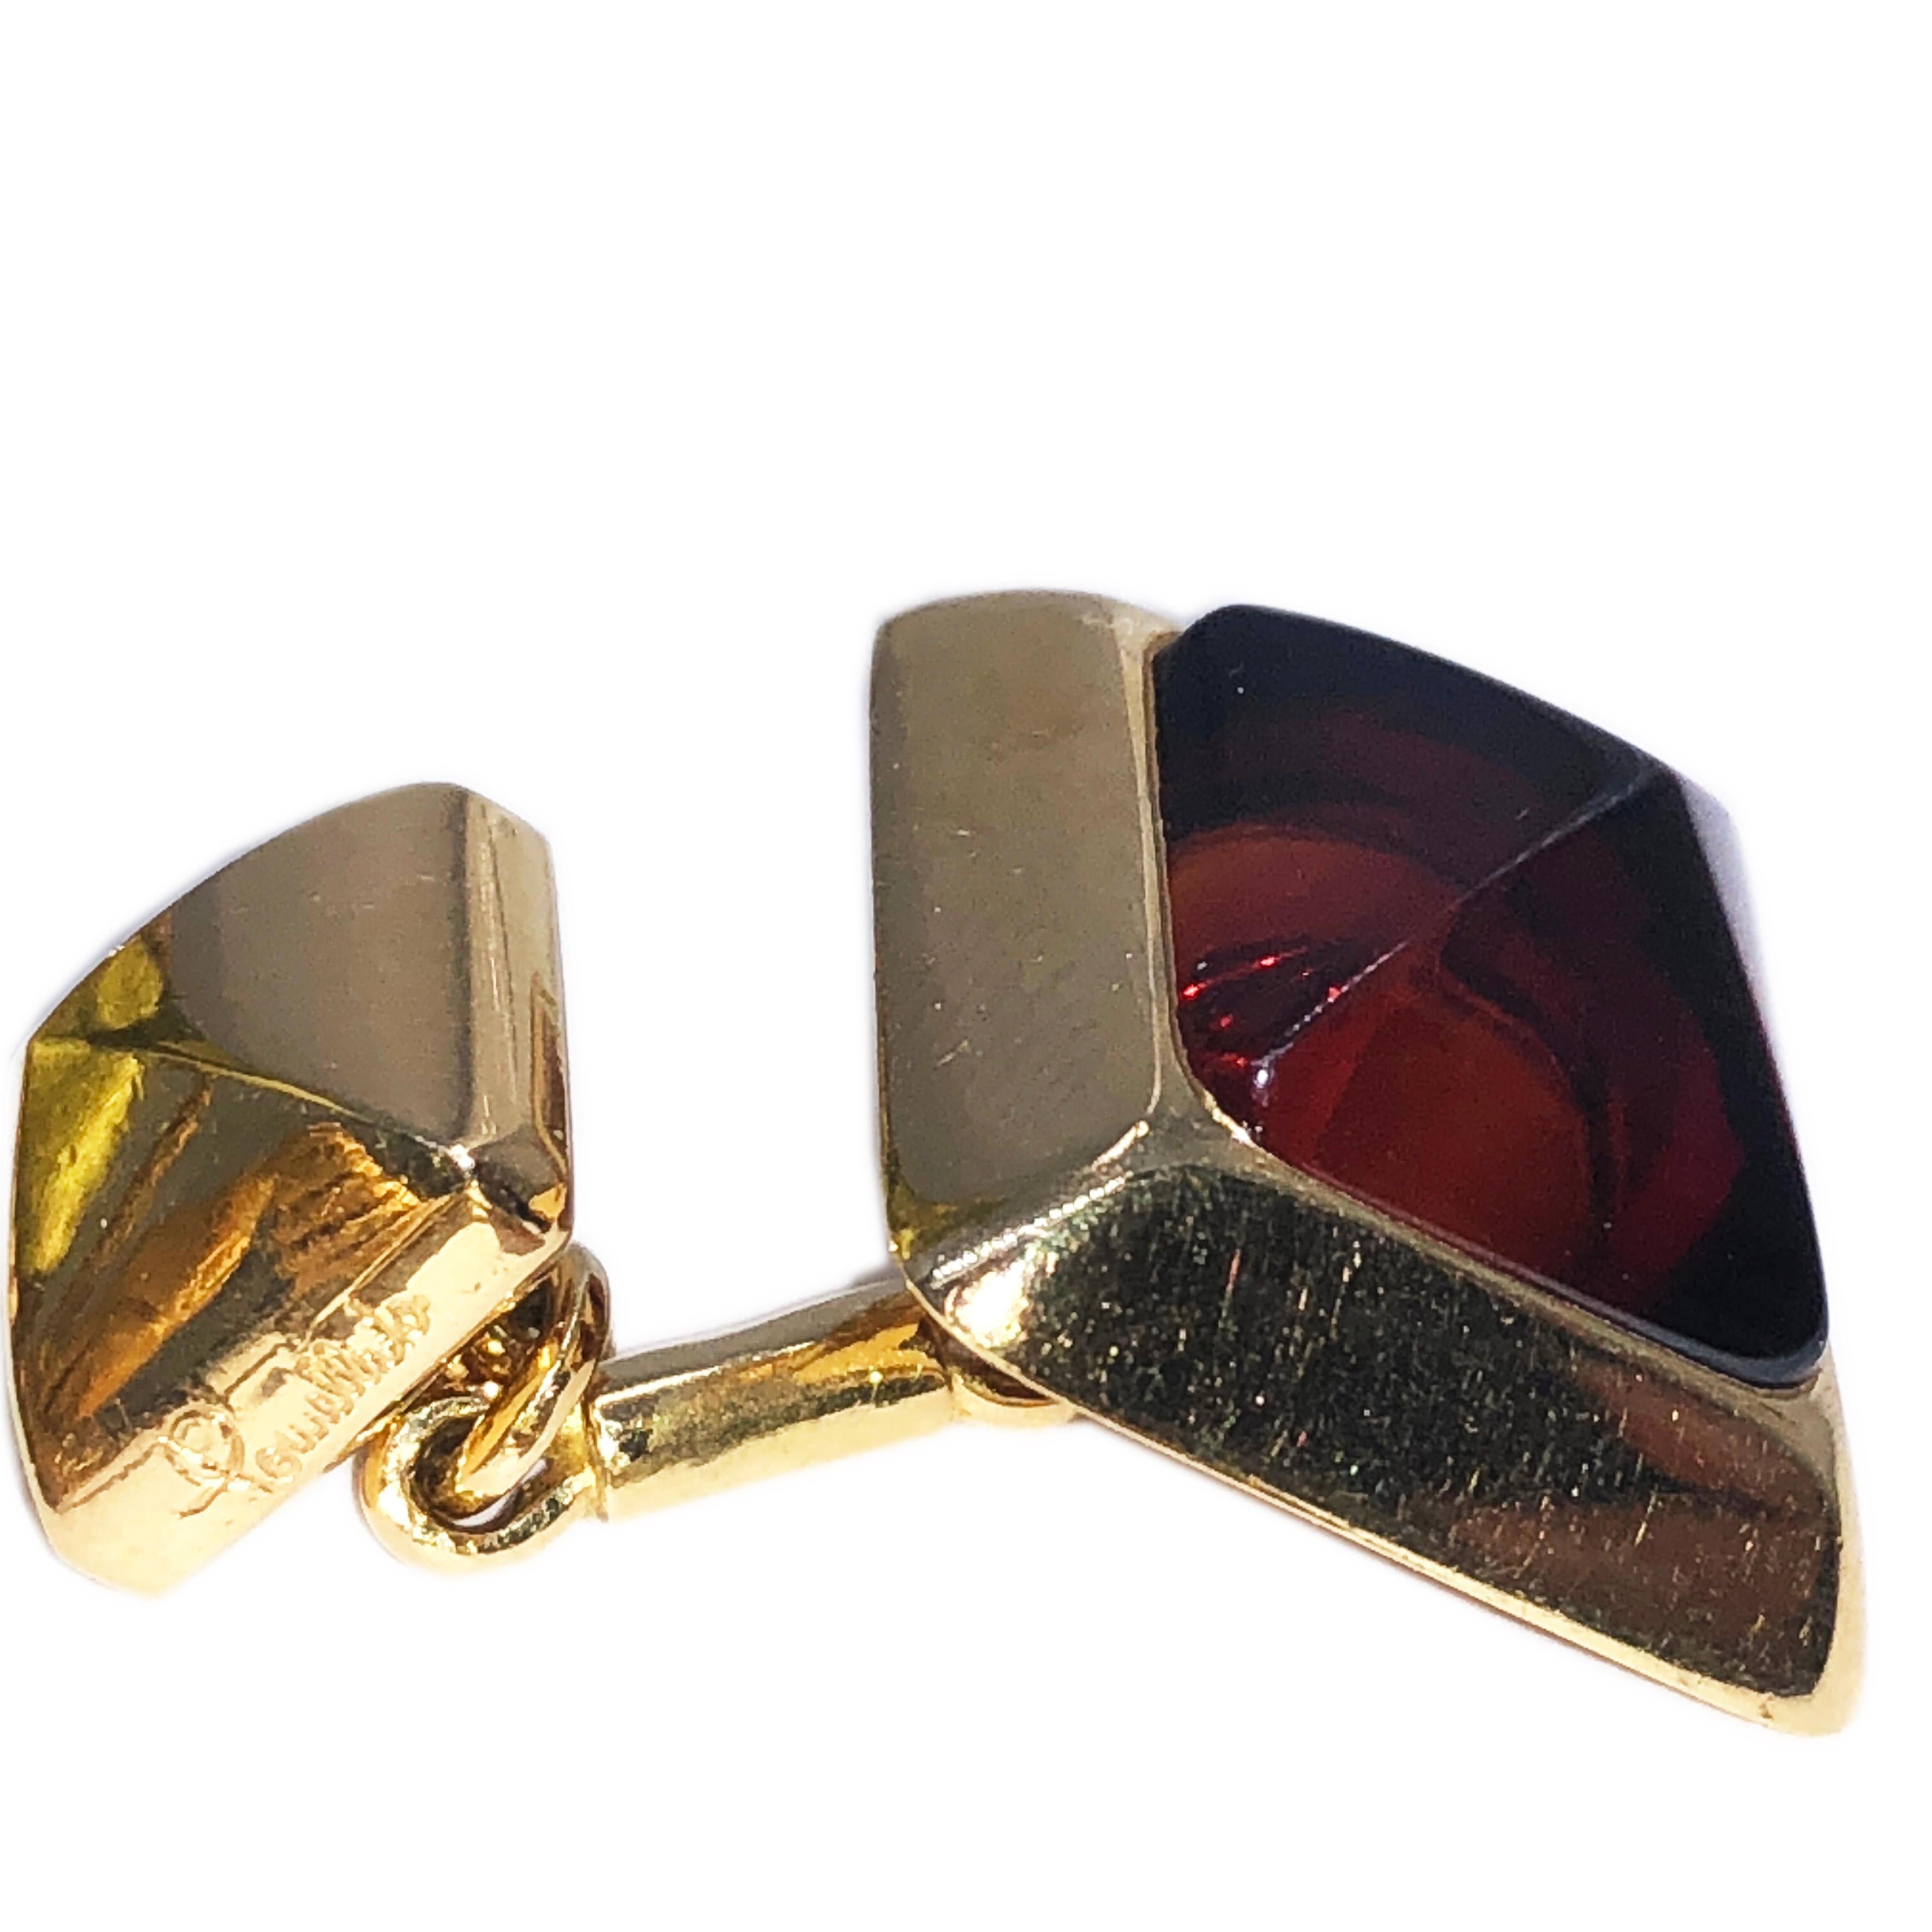 Iconic, Original 1994, Pyramid Shaped Natural Madeira Citrine Cufflinks, 18K Yellow Gold Setting. A limited edition Collar Bar Clip from the same collection is available as well.
This fabulous piece has never been used or worn and it is still in its